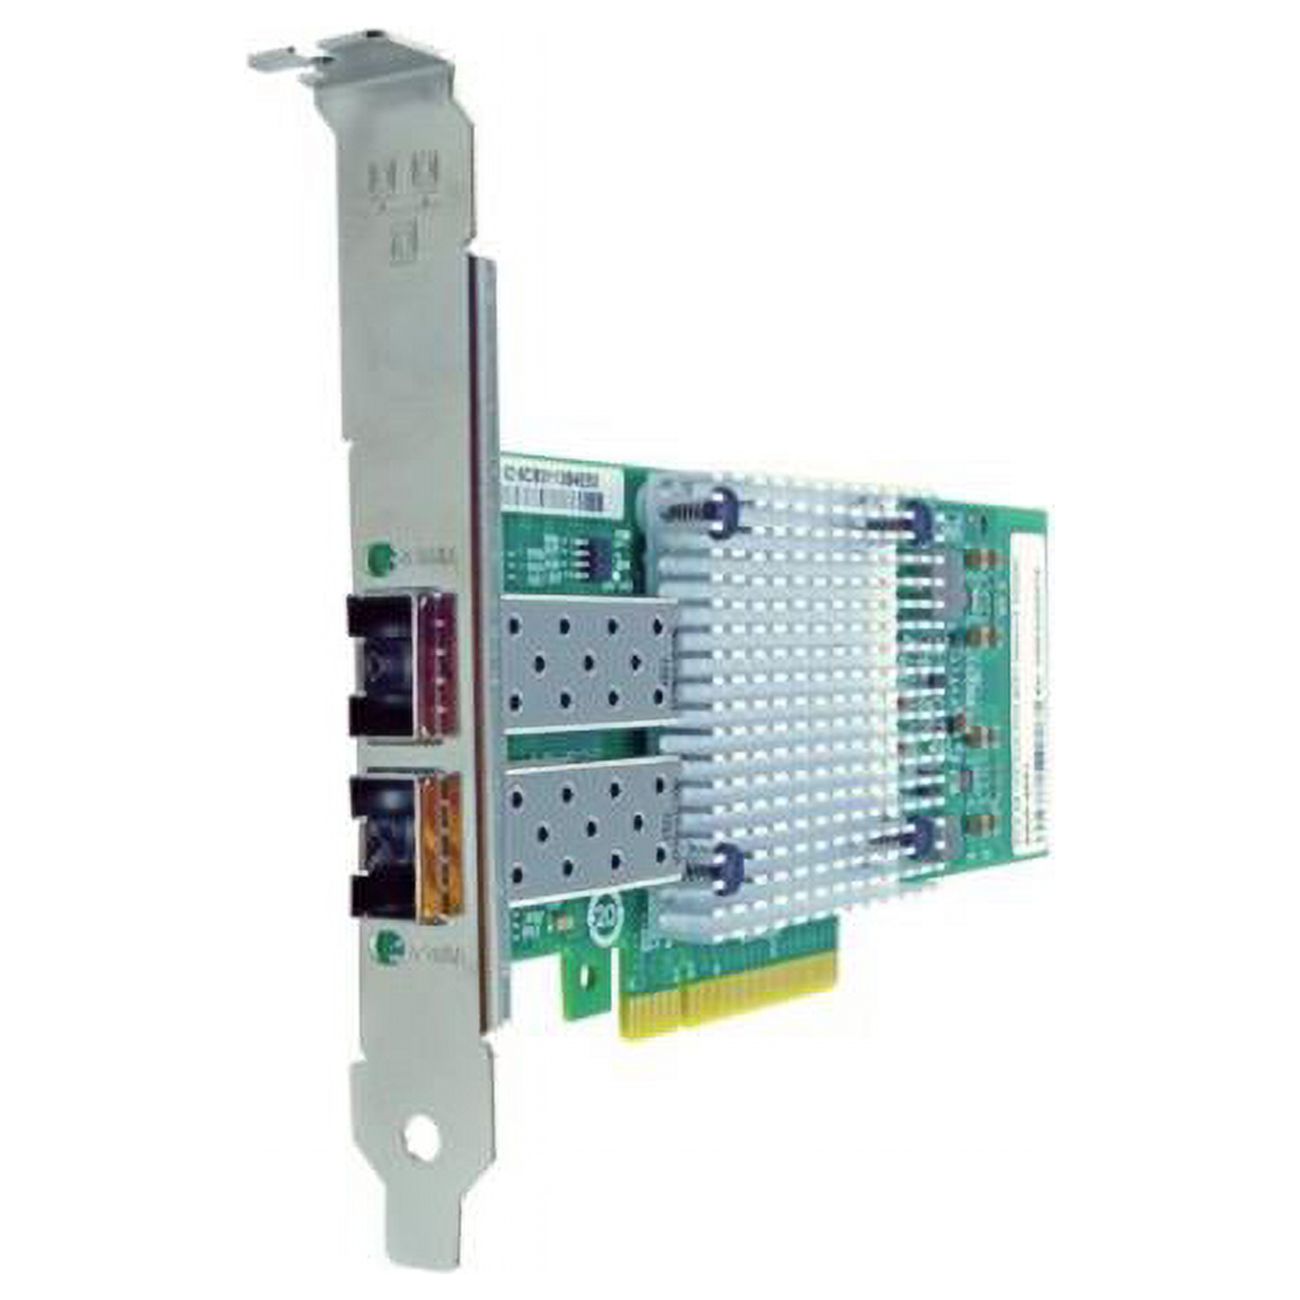 PCIe X8 10GB Dual Port Fiber Network Adapter for Dell - image 1 of 1